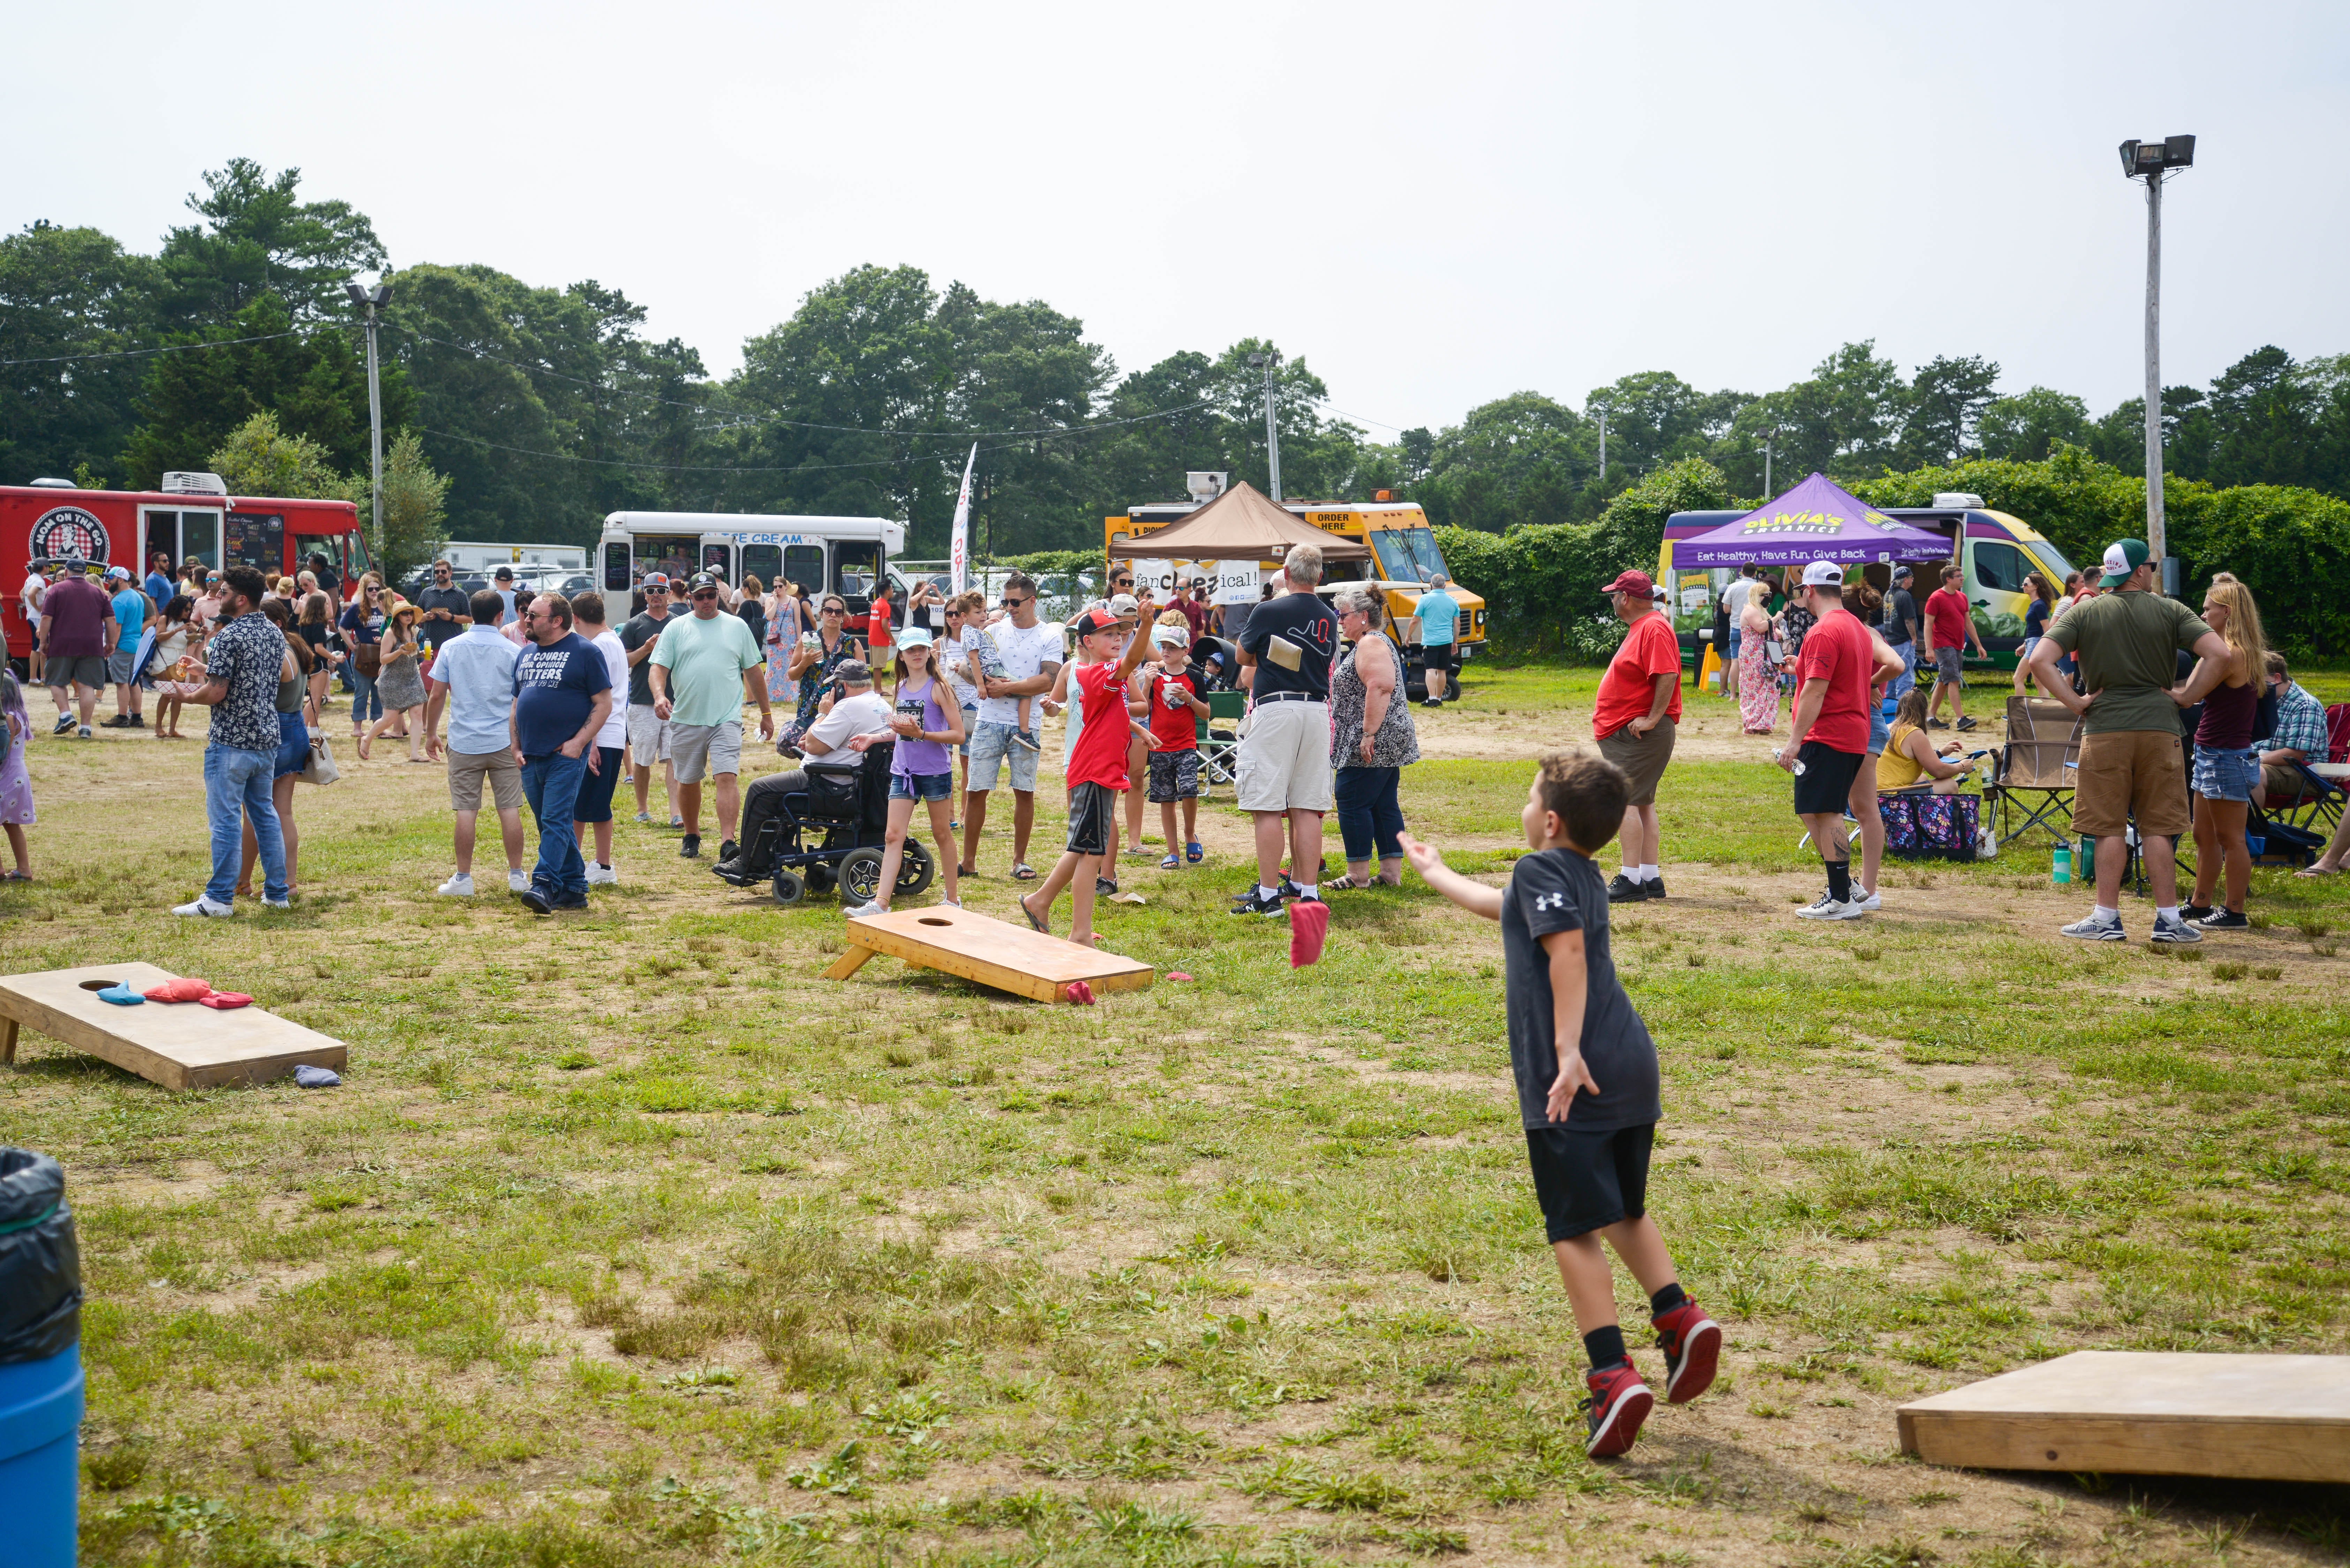 12th Annual Cape Cod Food Truck and Craft Beer Festival